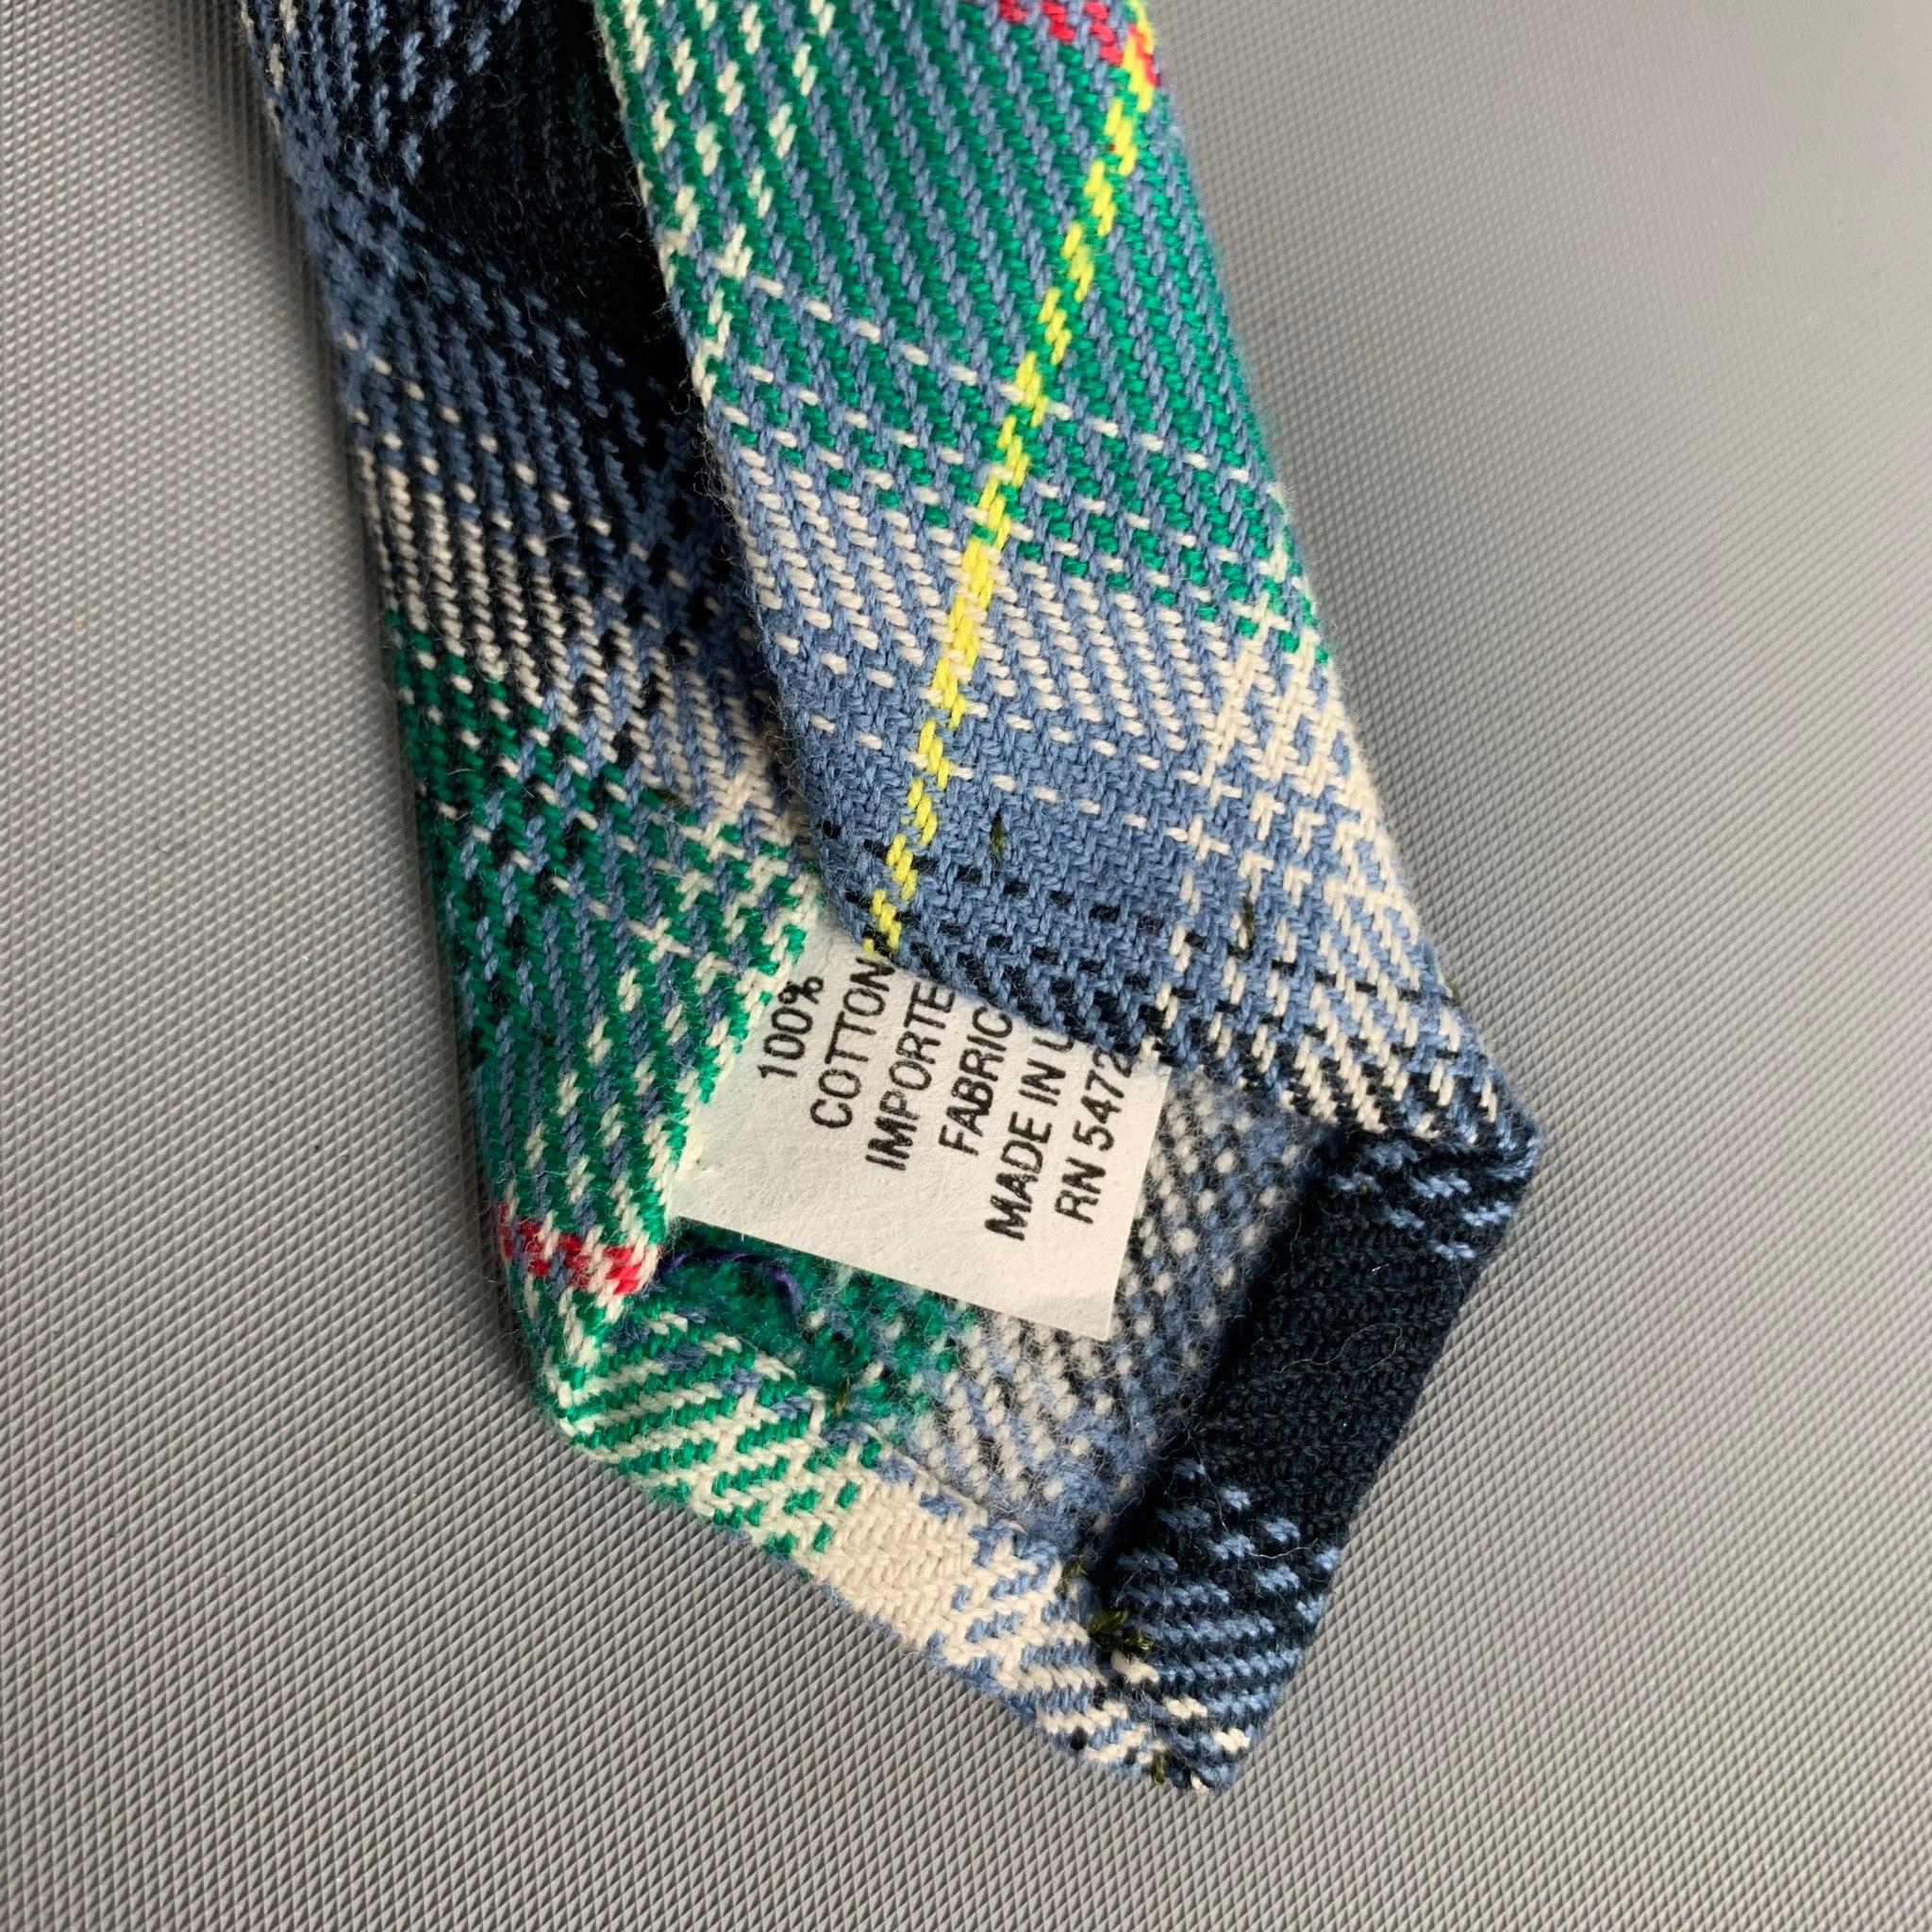 GITMAN BROS Green Plaid Cotton Tie In Good Condition For Sale In San Francisco, CA